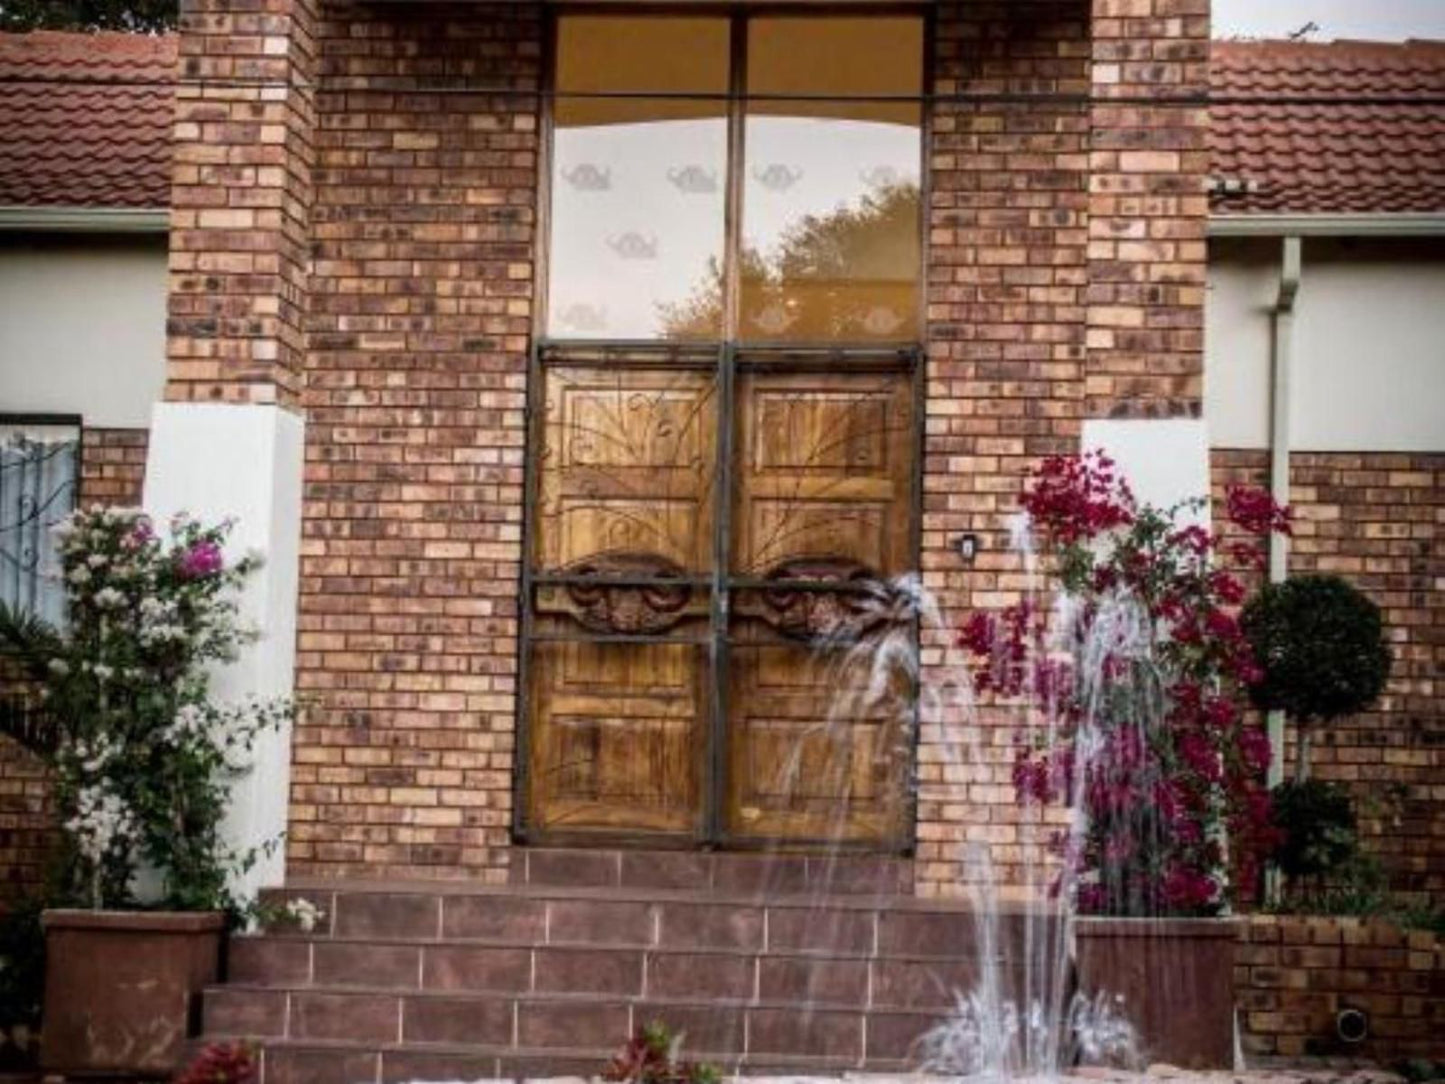 Guest House Serenity Hartbeespoort Dam Hartbeespoort North West Province South Africa Door, Architecture, House, Building, Brick Texture, Texture, Garden, Nature, Plant